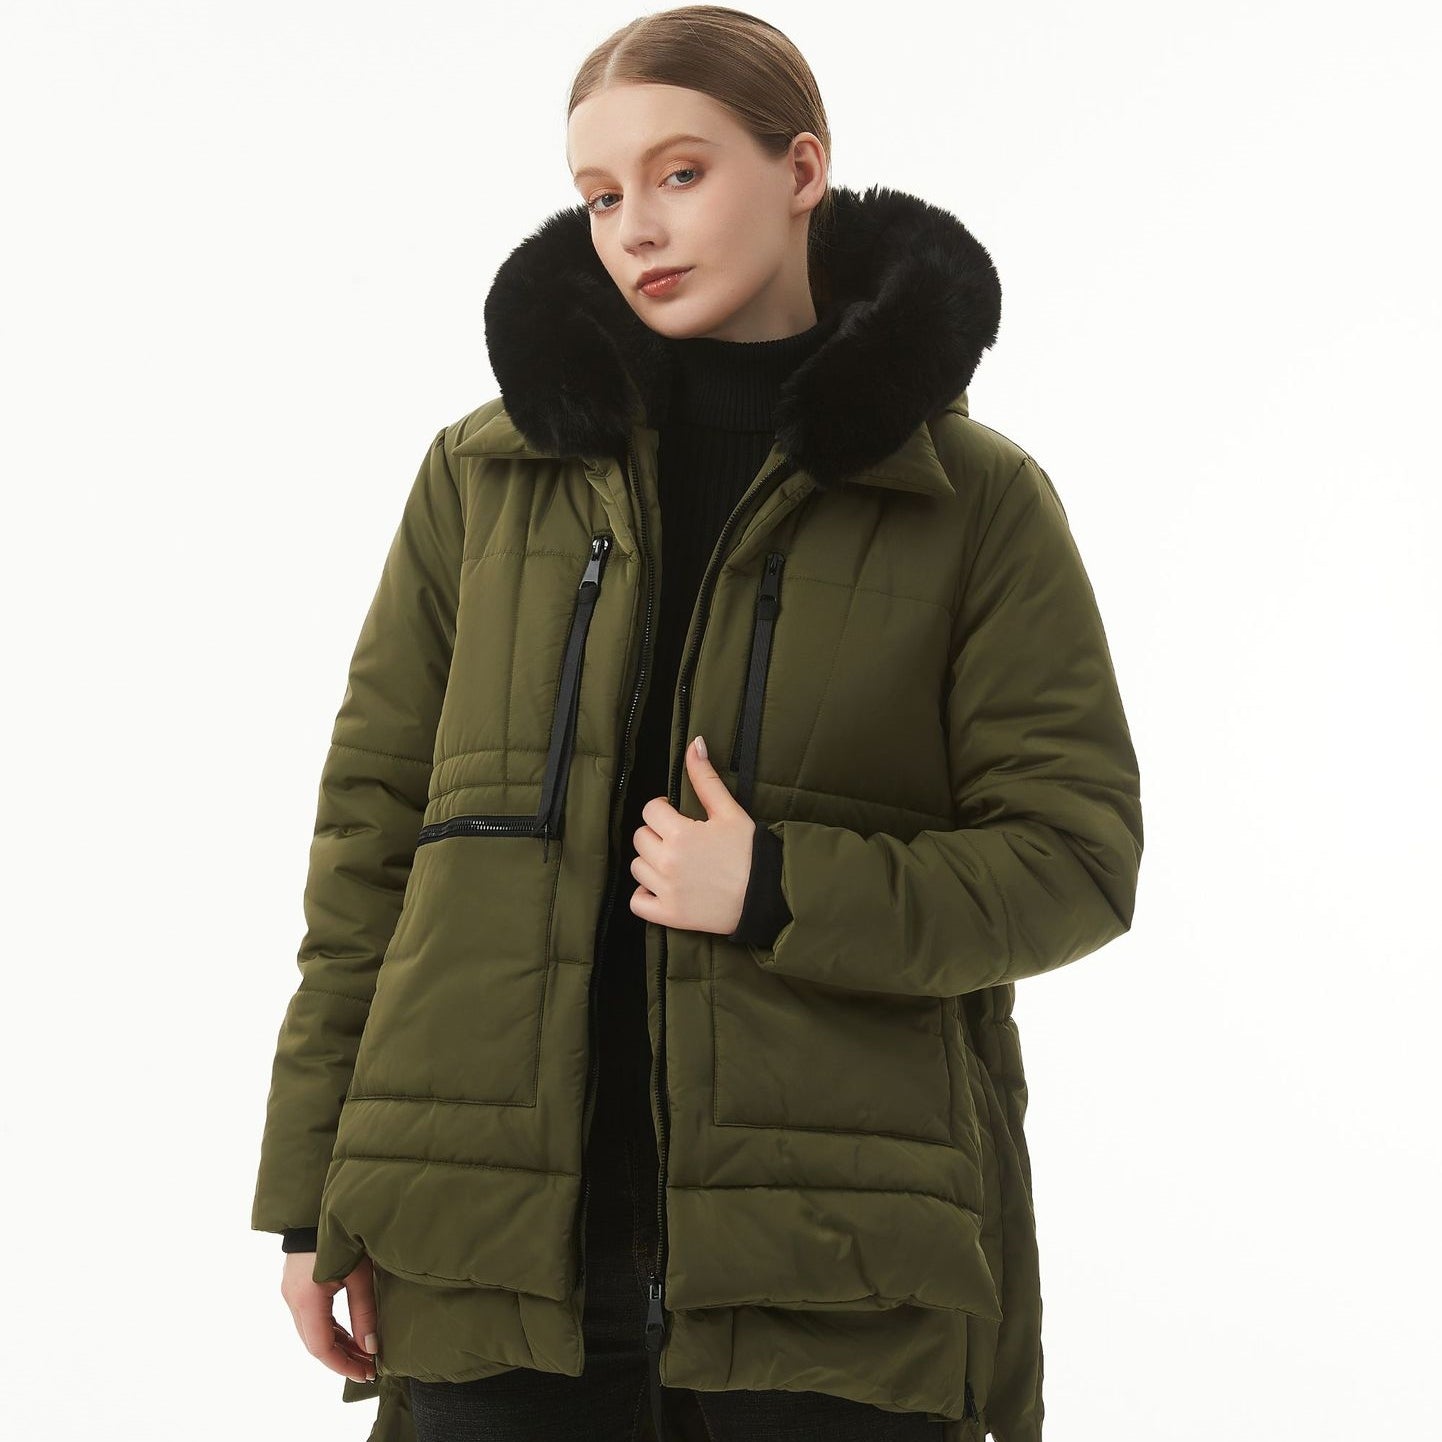 jackets  | Women's Casual Hooded Middle Long Cotton-padded Coat | Army Green |  L| thecurvestory.myshopify.com